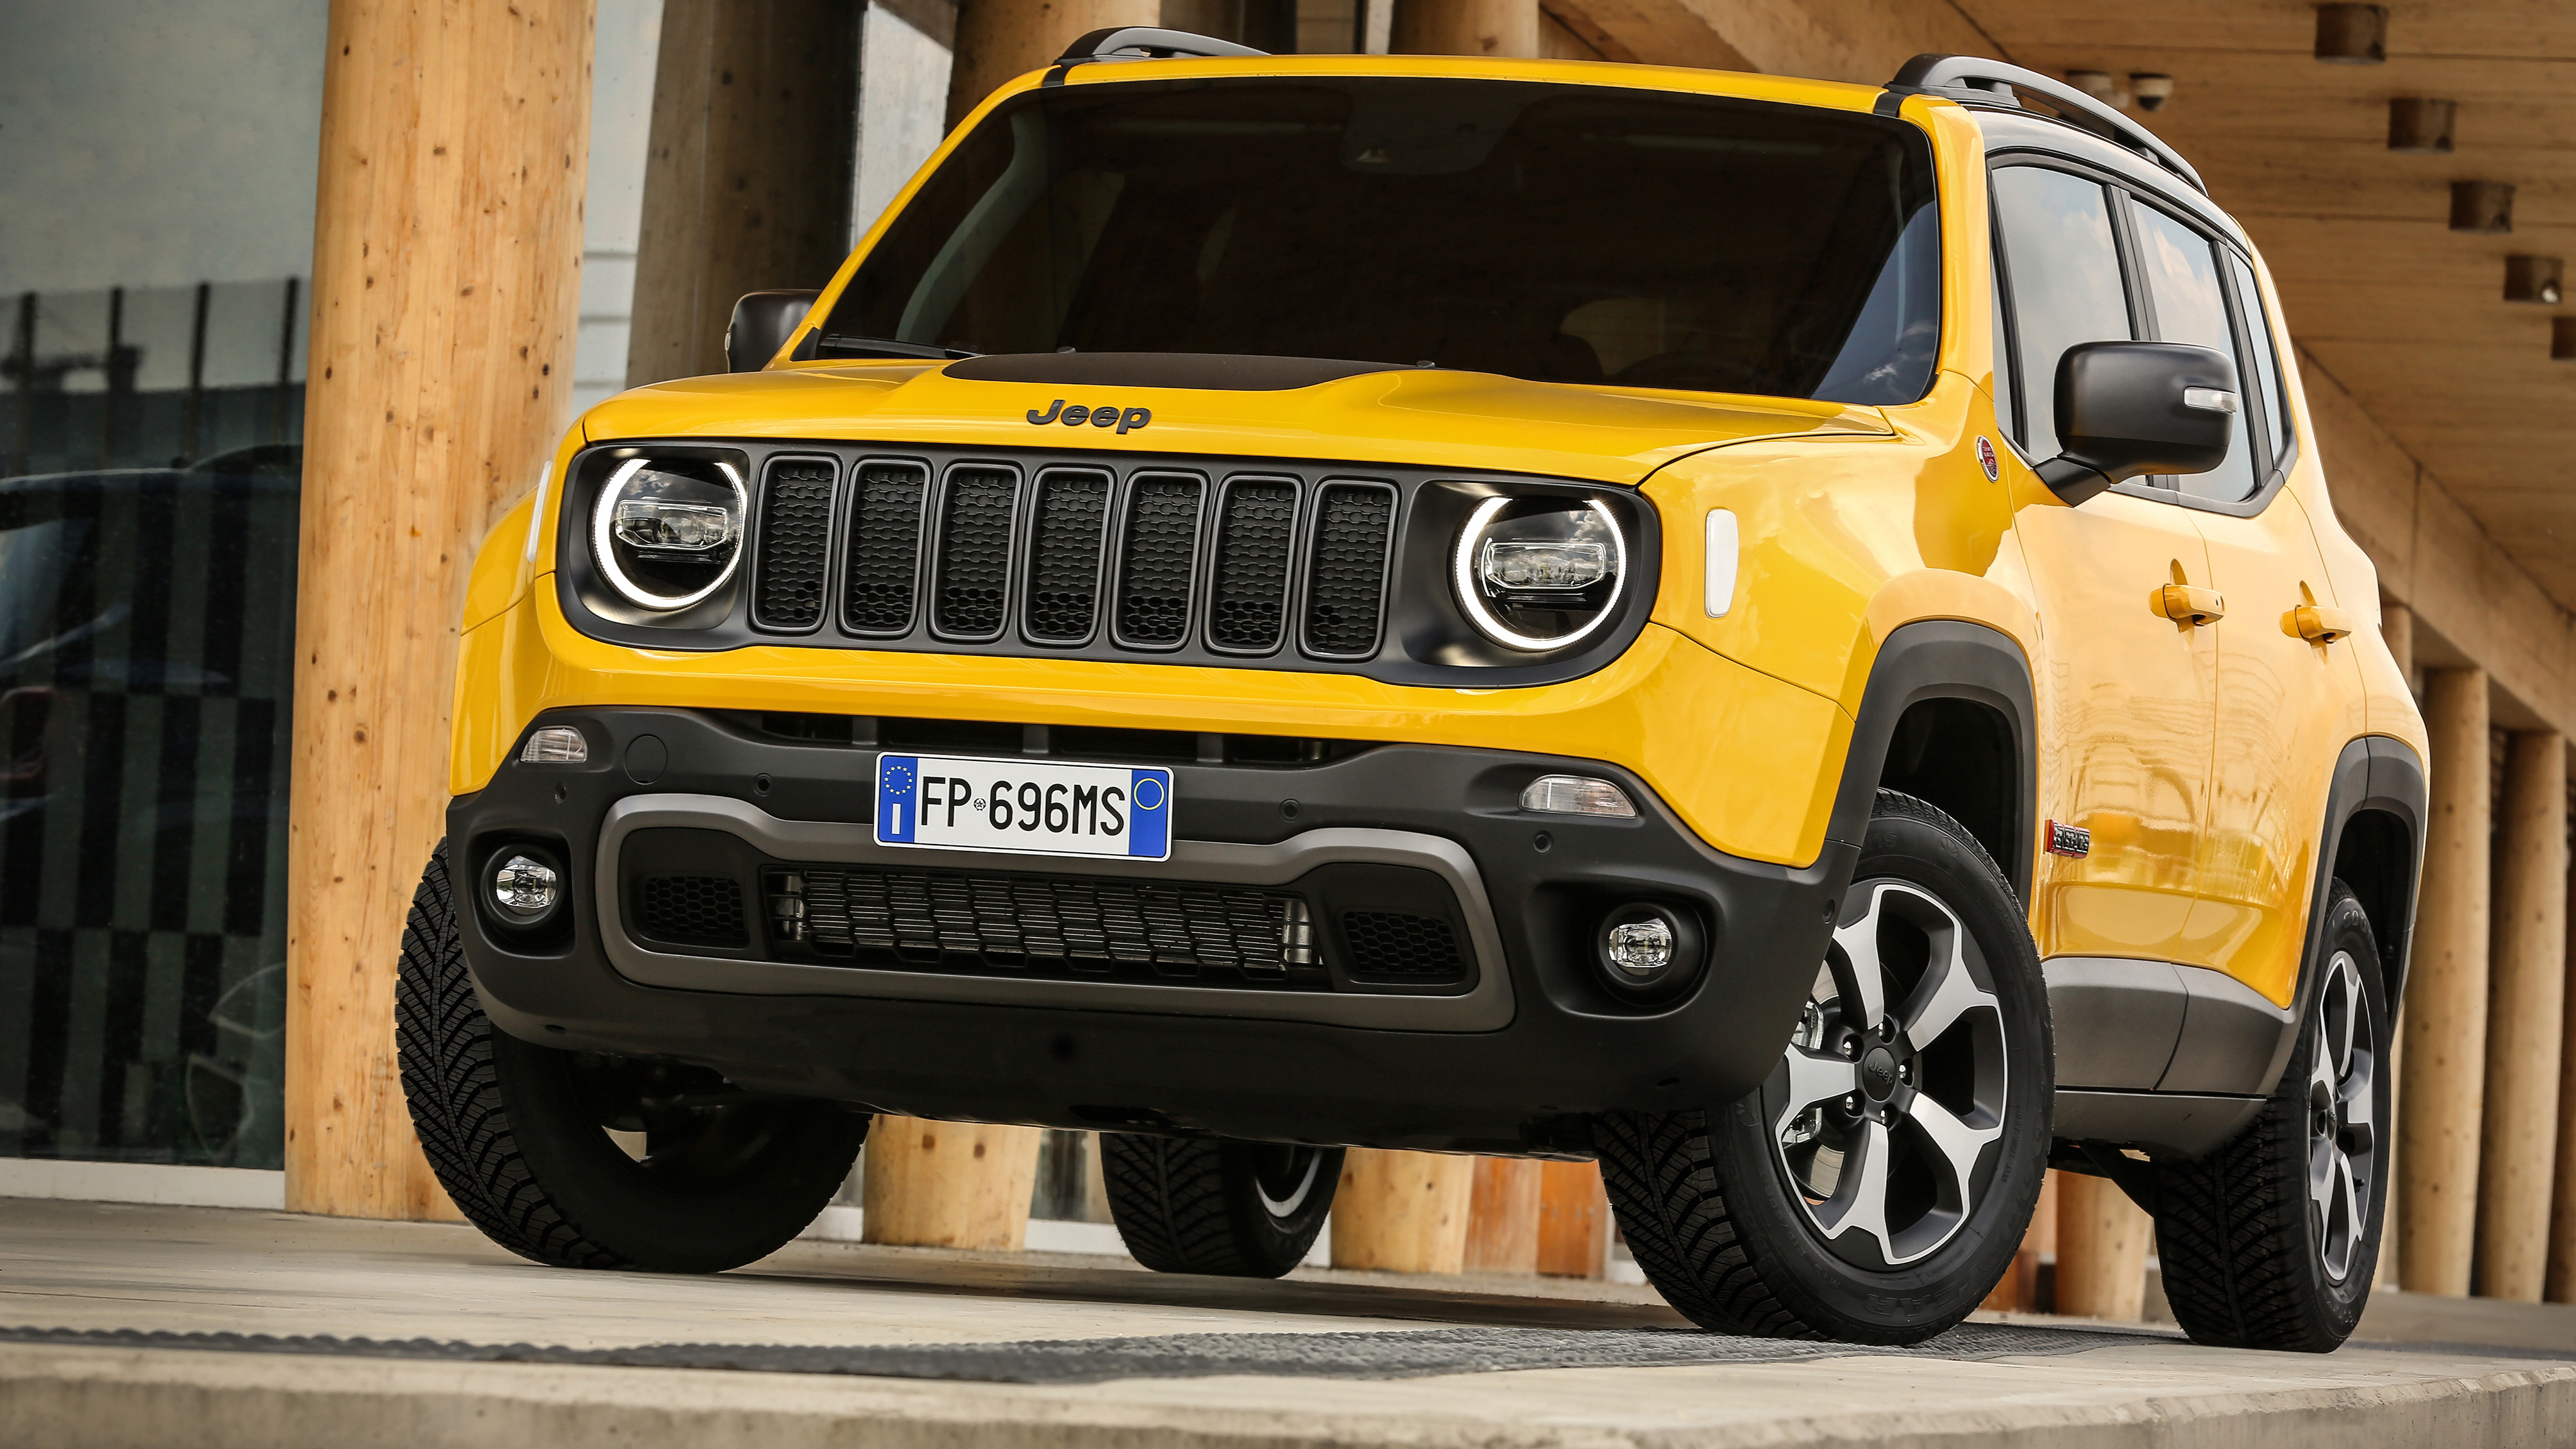 Jeep Renegade hd restyling